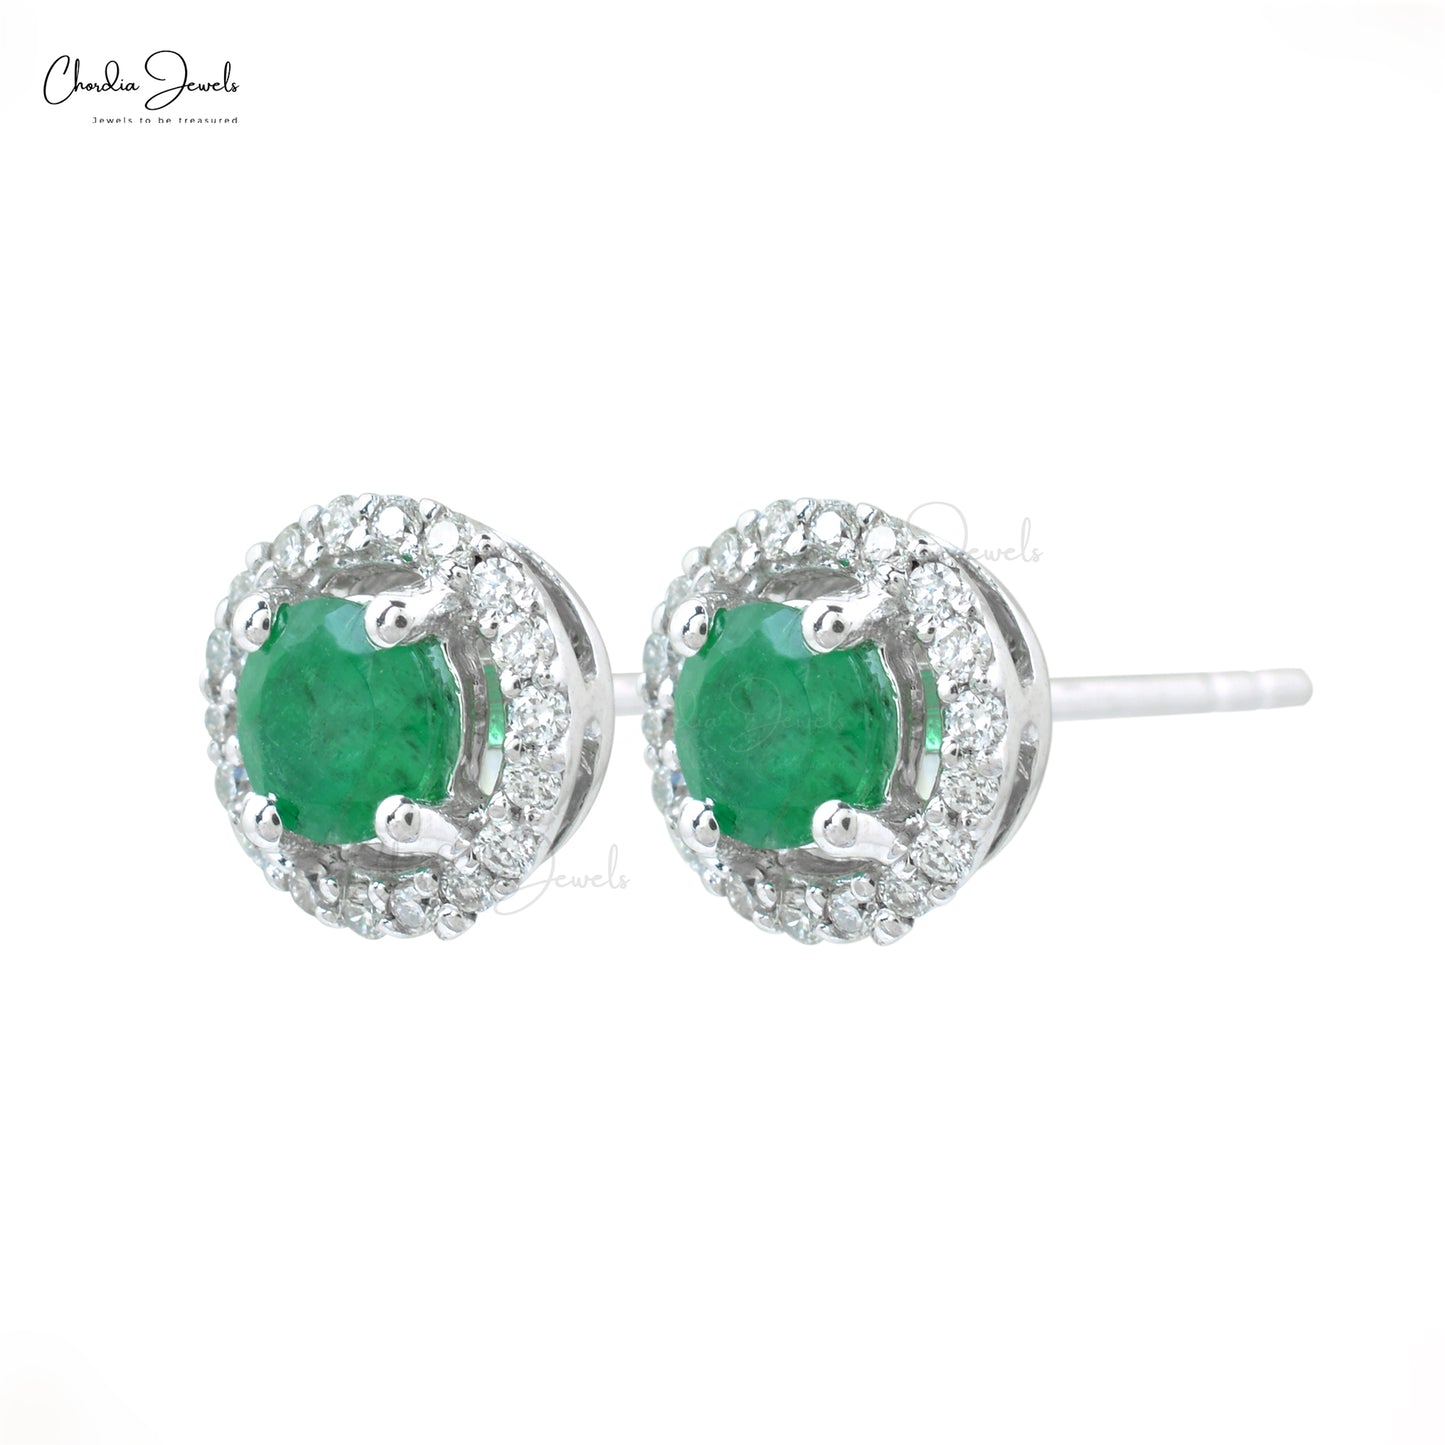 Treat yourself with these emerald woman's earrings.